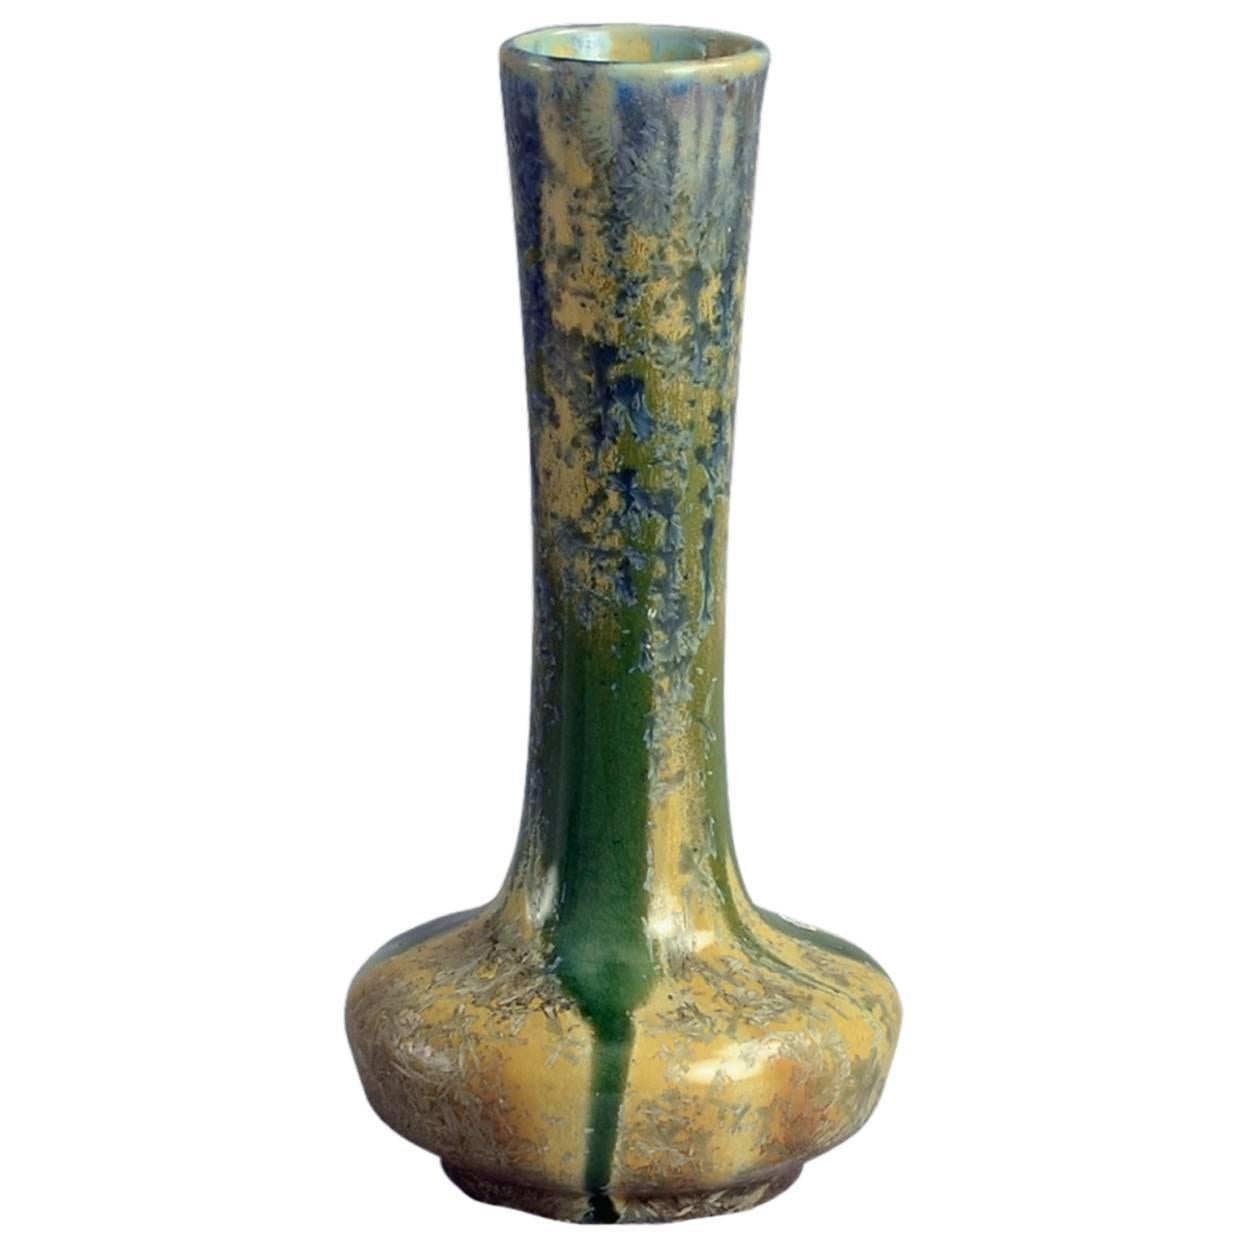 Art Nouveau Stoneware Vase with Dripping Glaze by Pierrefonds, France For Sale